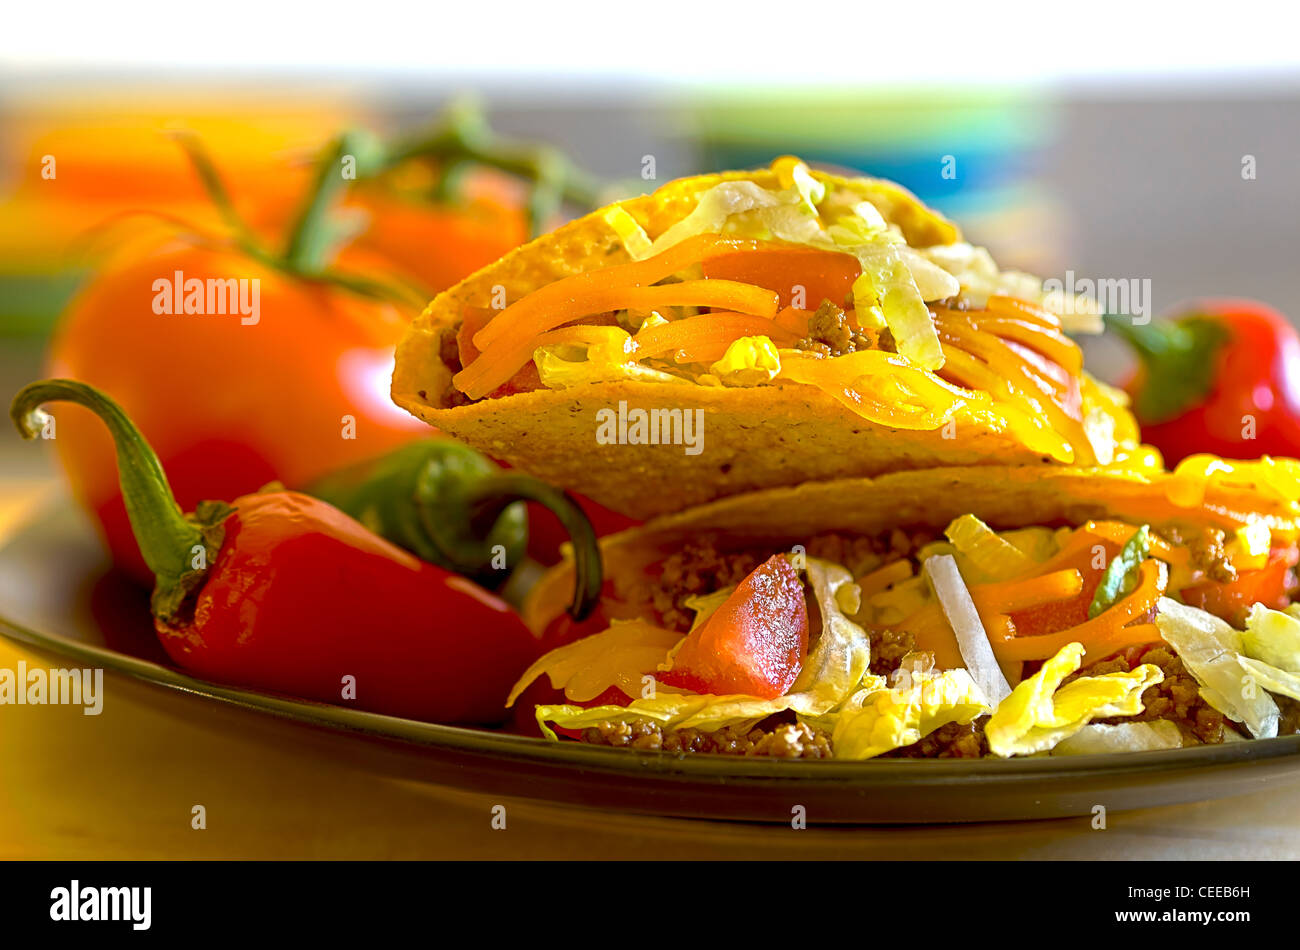 Tacos on plate with vine ripe tomatoes, red and green chili peppers. Stock Photo